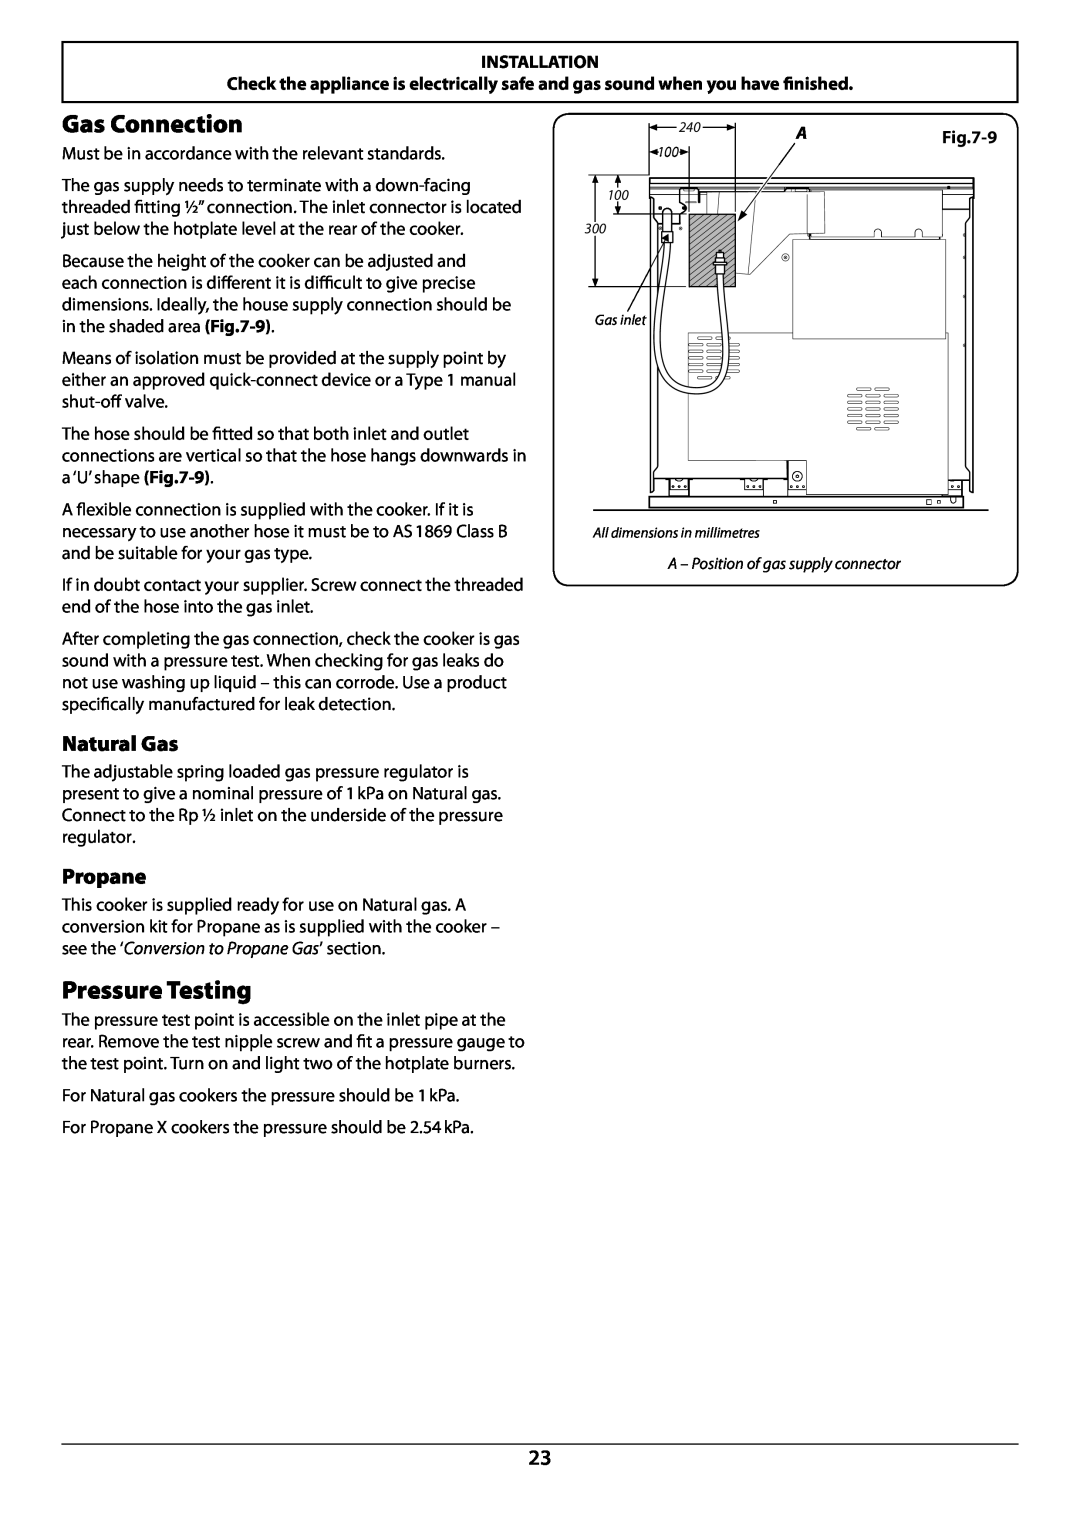 Falcon U108610-07 installation instructions Gas Connection, Pressure Testing, Natural Gas, Propane, Installation, 9 